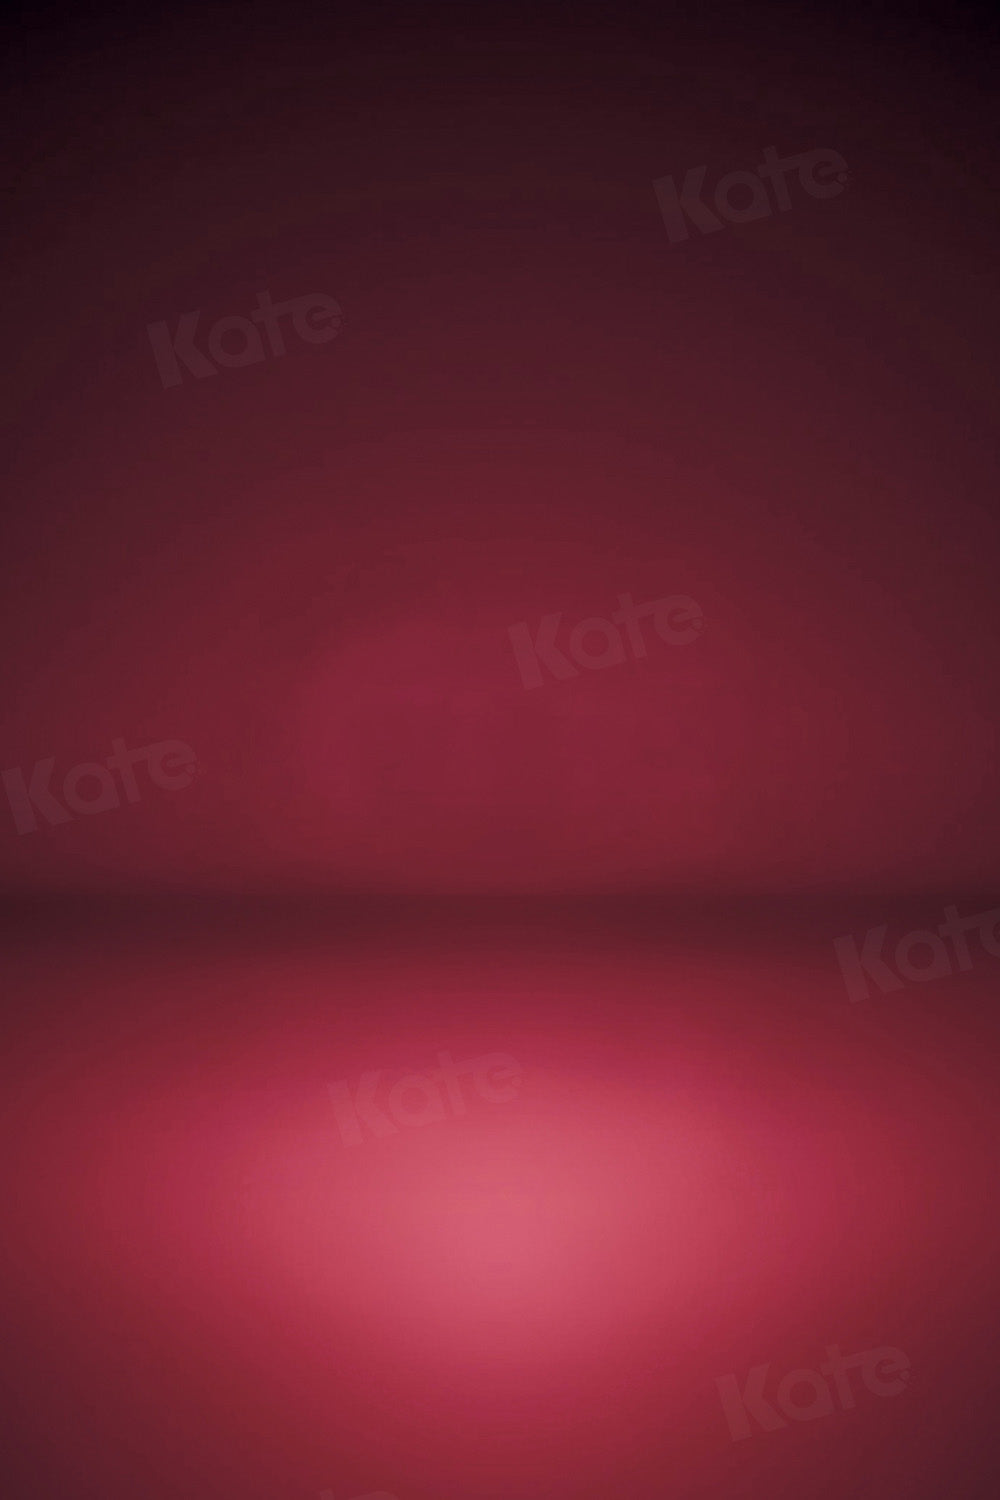 Kate Abstract Red Backdrop Fine Art Designed by Kate Image